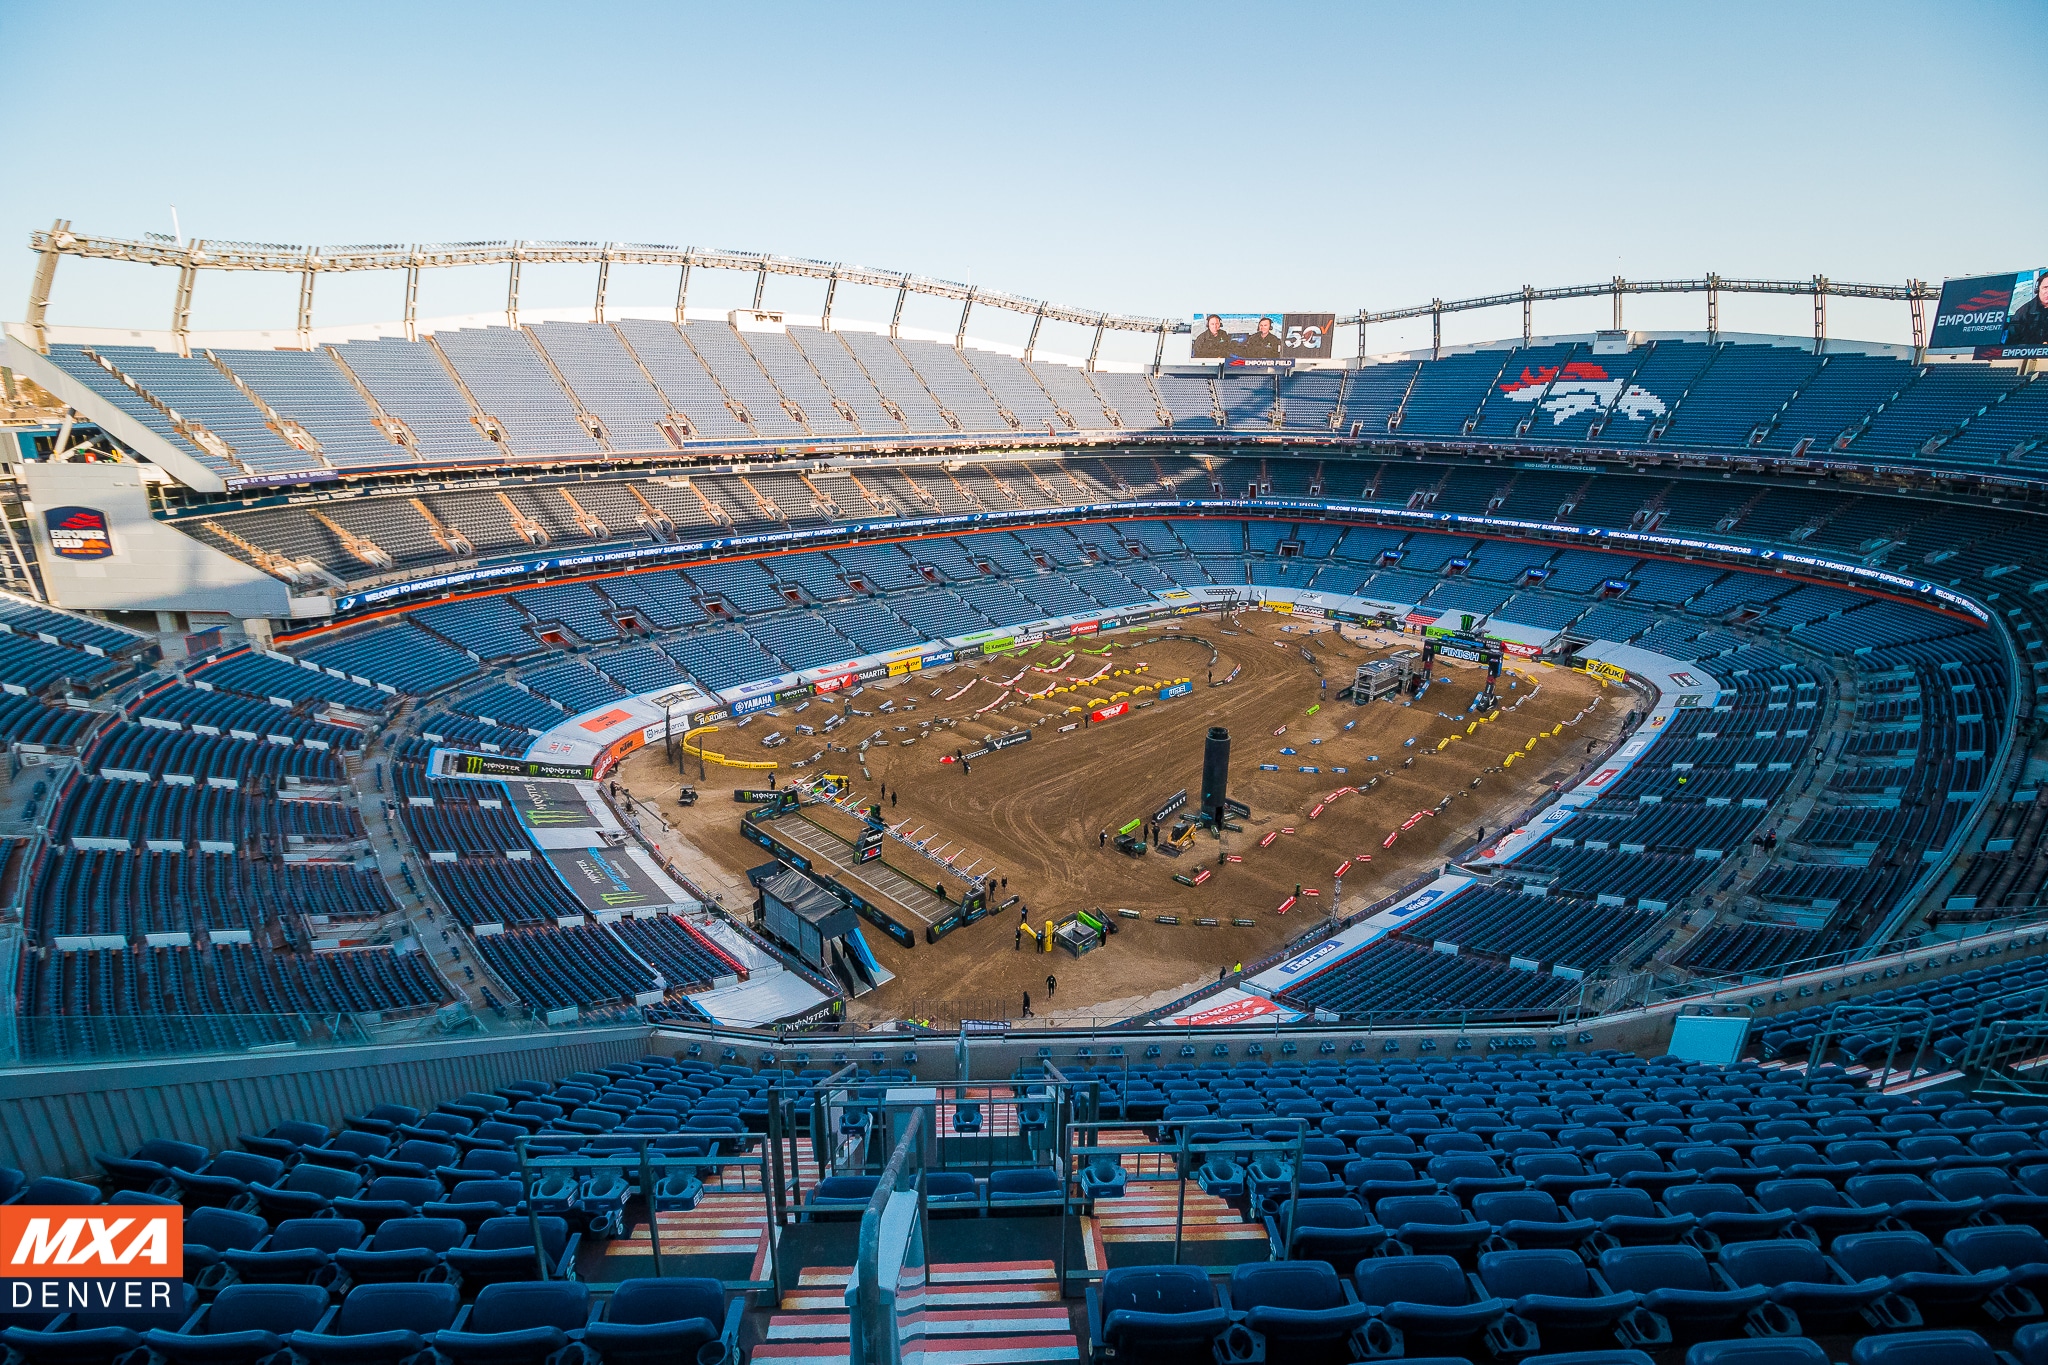 2022 SUPERCROSS POINT STANDINGS AFTER ROUND 16 - Motocross Action Magazine